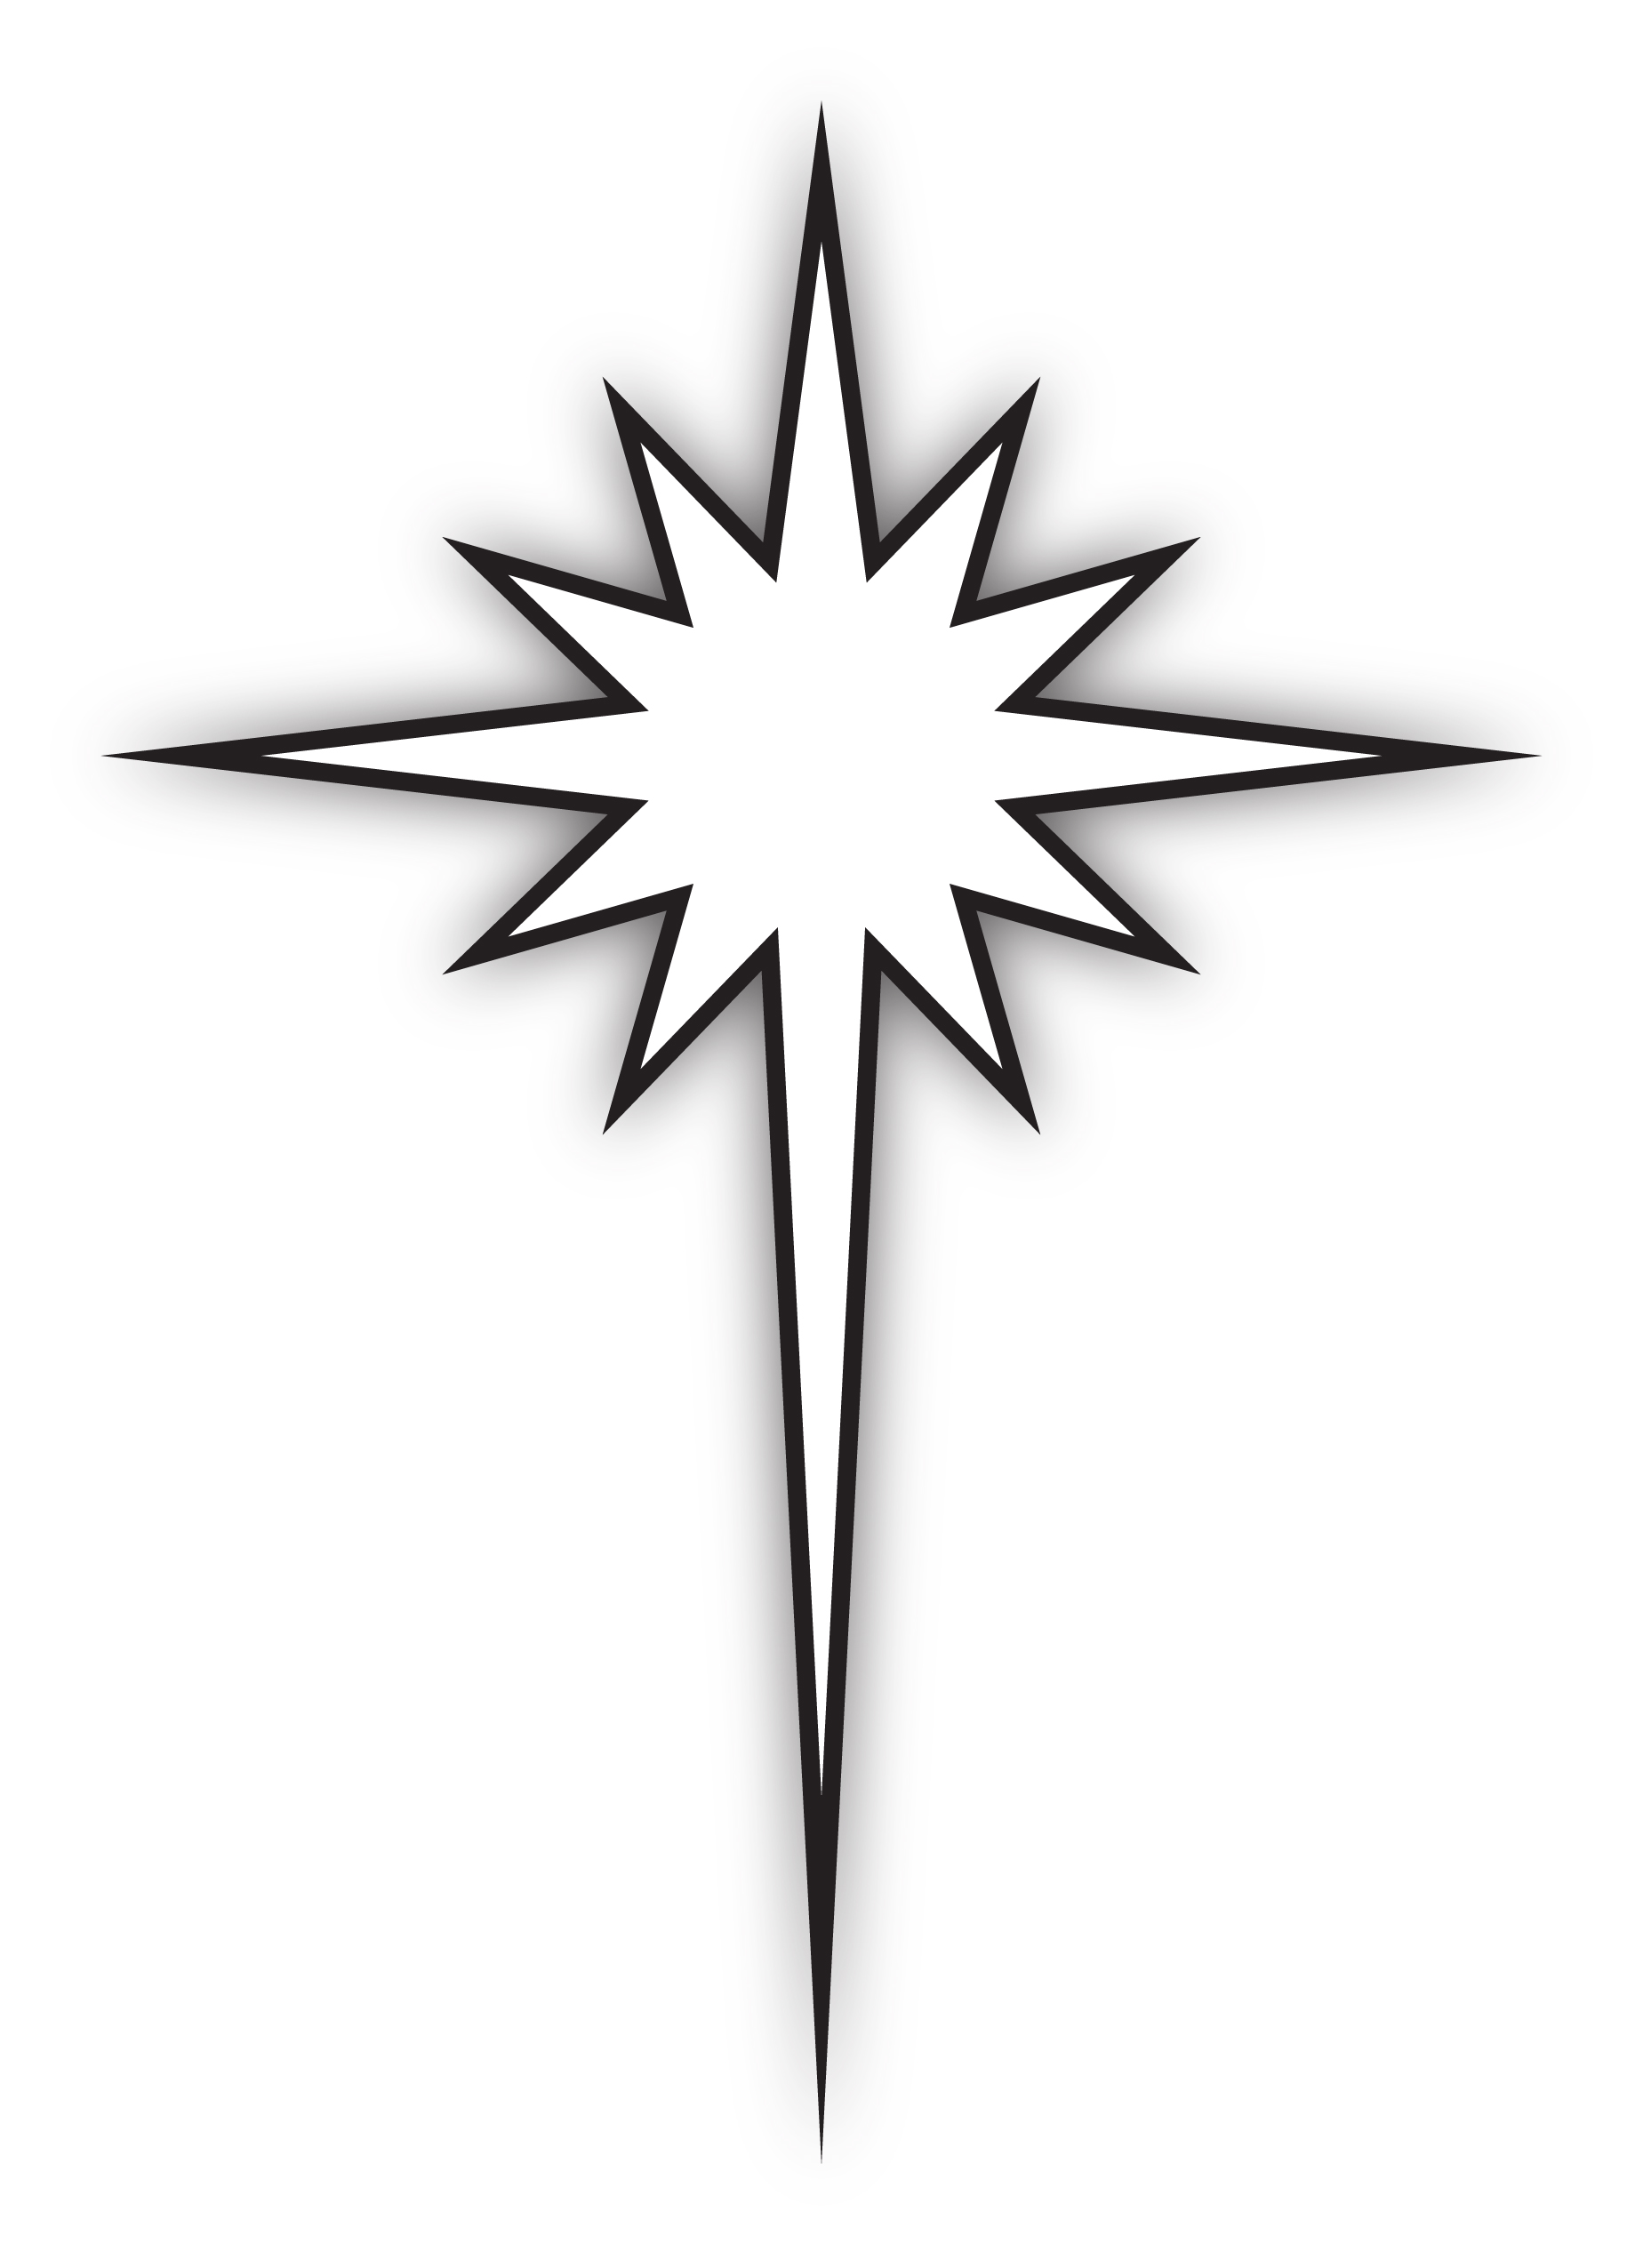 North star clipart black and white